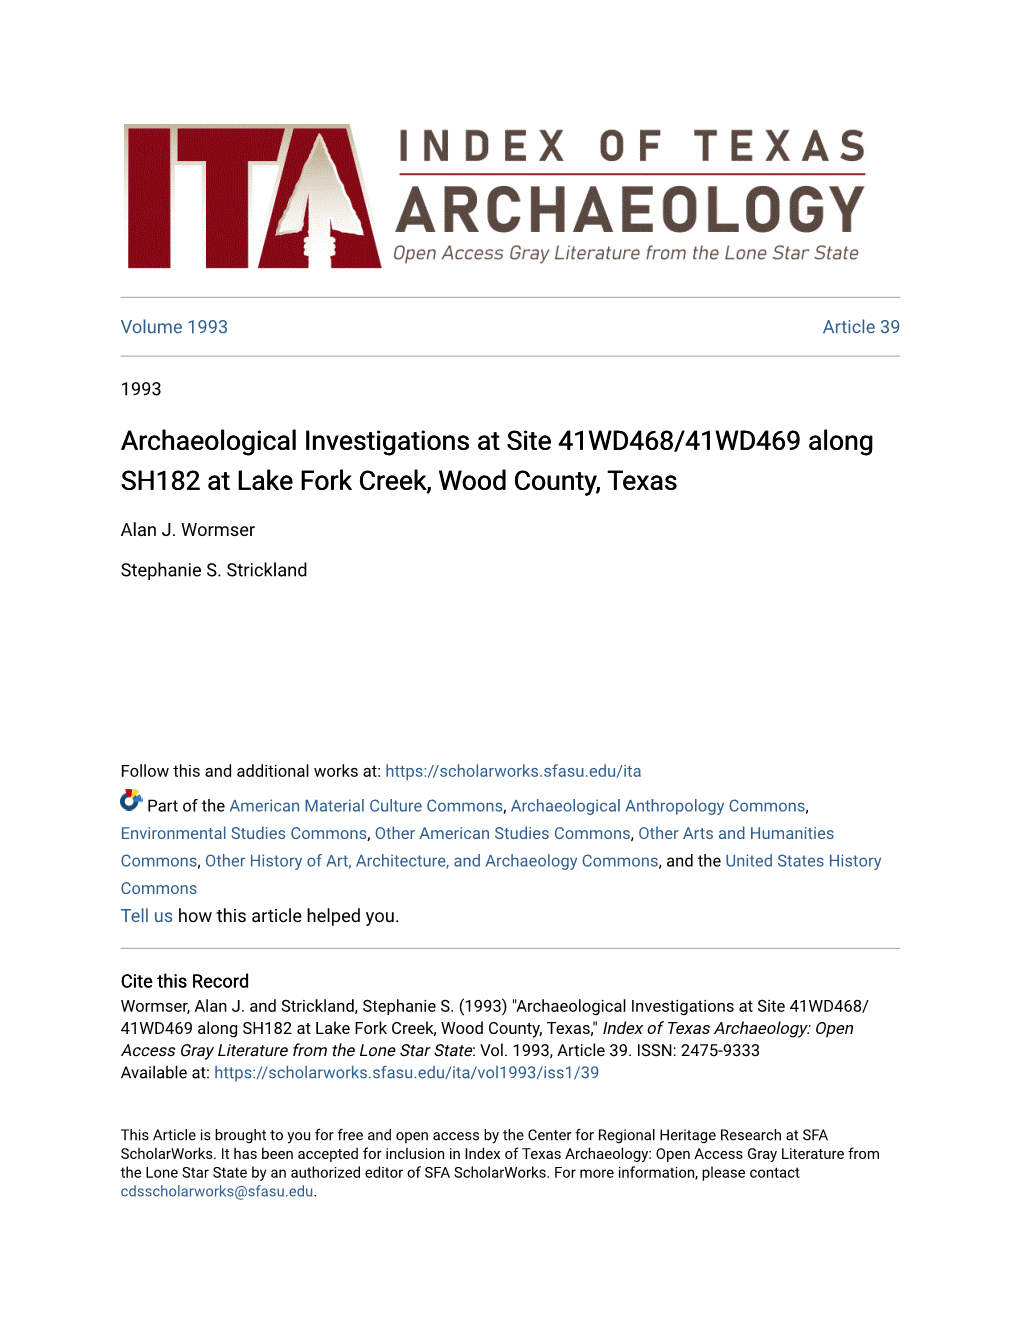 Archaeological Investigations at Site 41WD468/41WD469 Along SH182 at Lake Fork Creek, Wood County, Texas